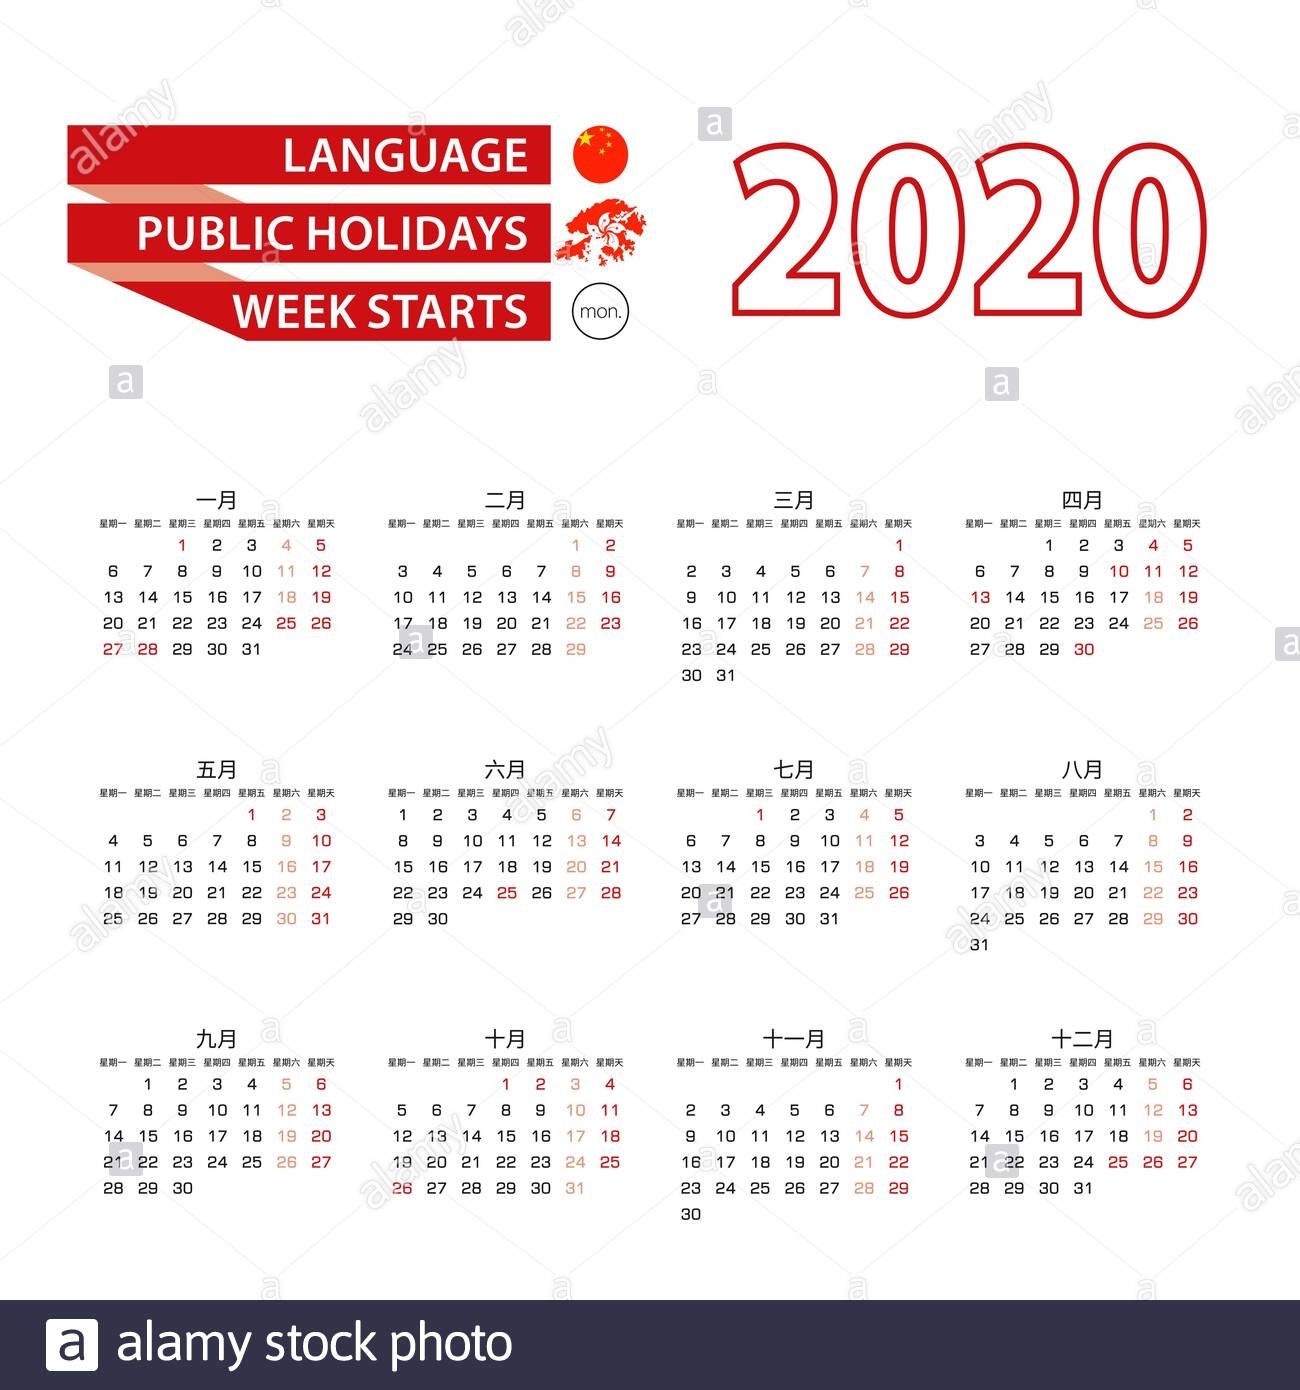 Calendar 2020 In Chinese Language With Public Holidays The Dashing 2020 Calendar Hong Kong Template